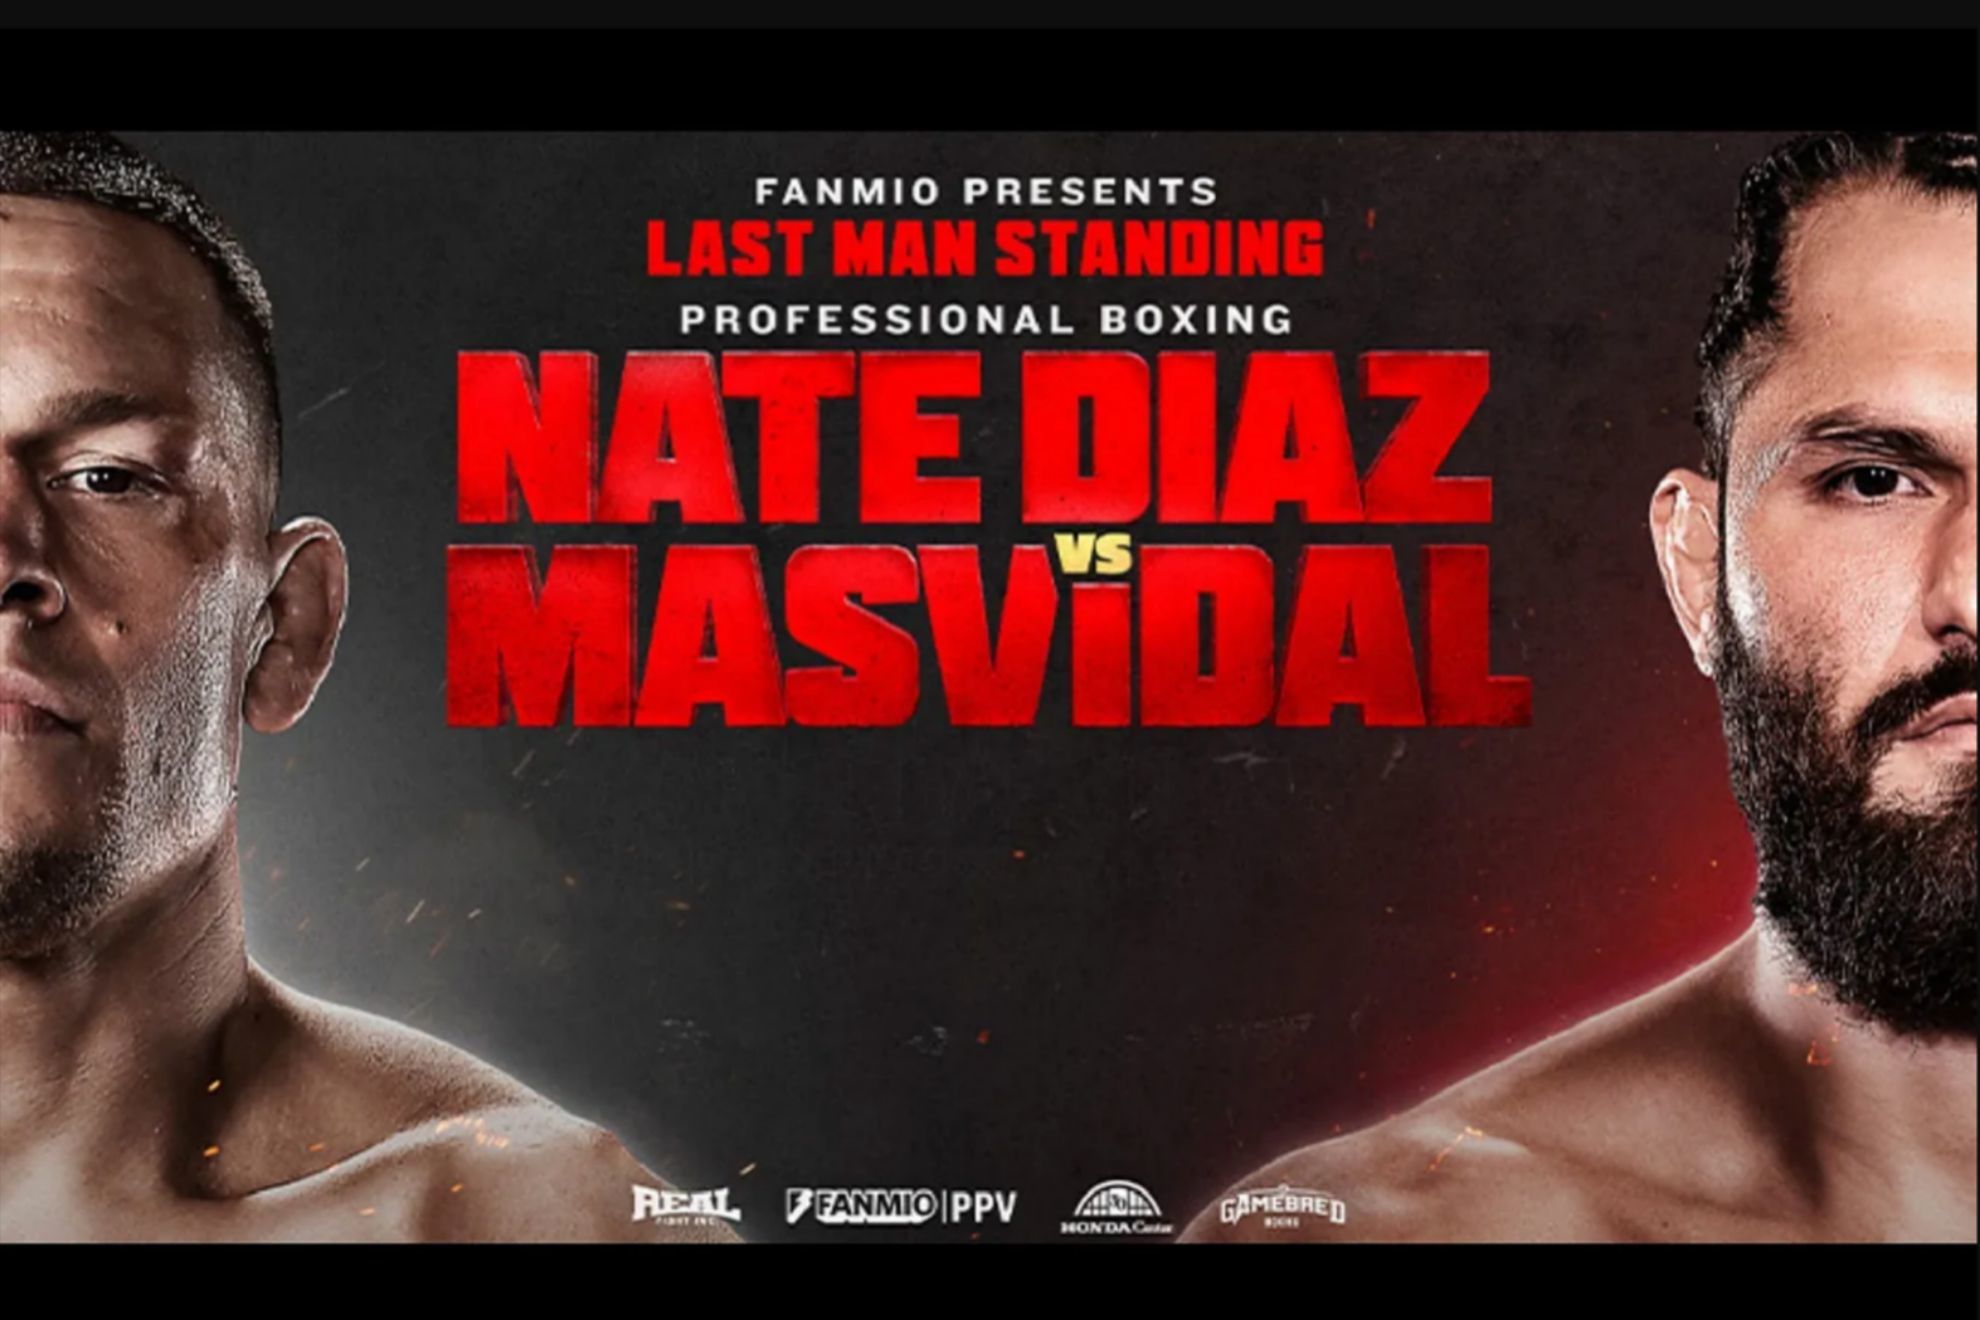 Nate Diaz vs. Masvidal Boxing Card: What will be tonights most important fights?